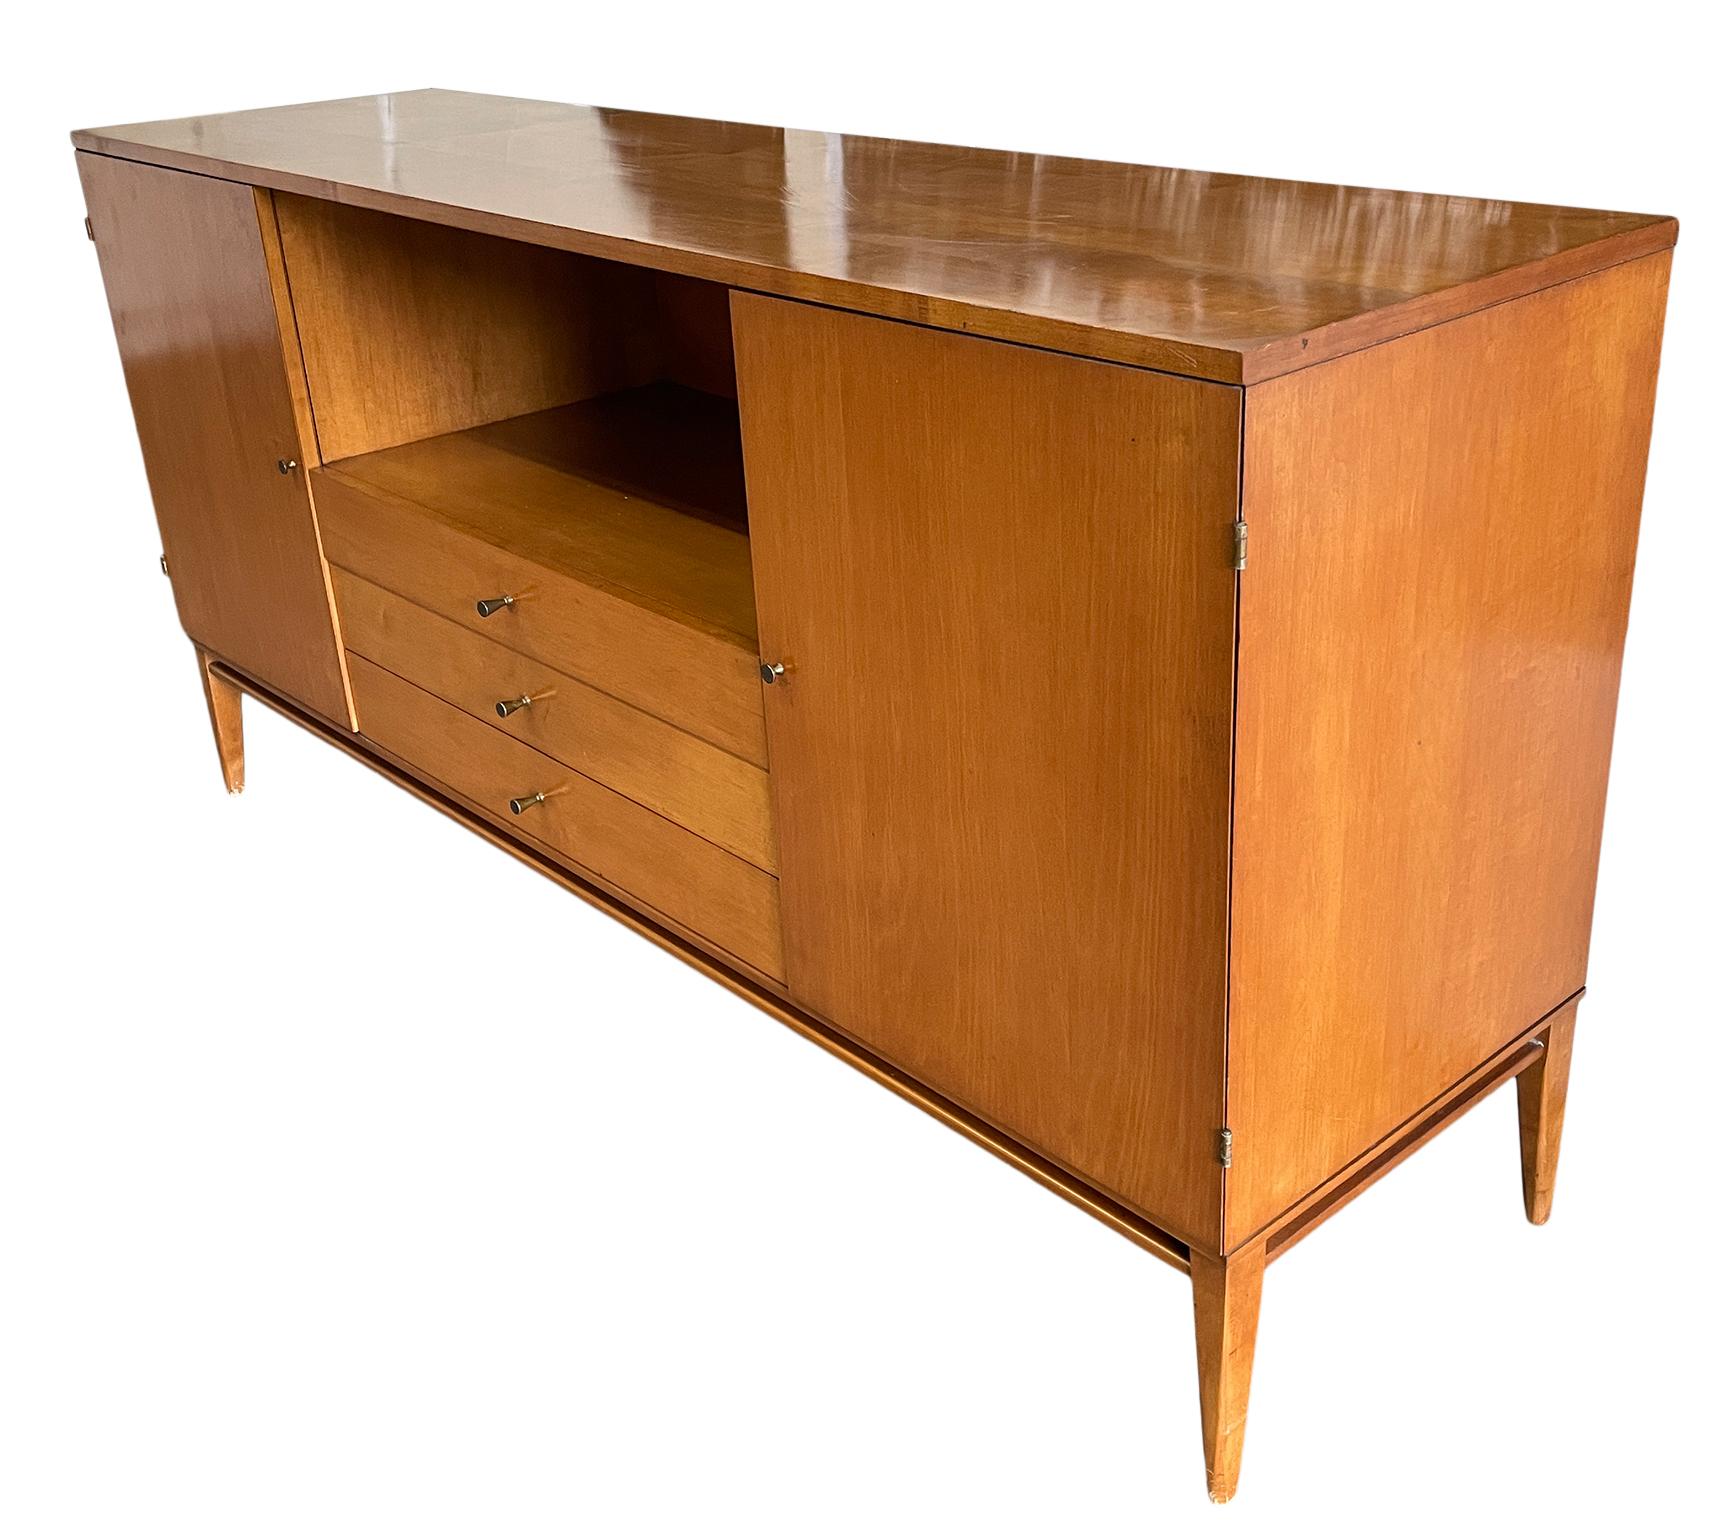 Vintage midcentury Paul McCobb three-drawer dresser credenza with (2) cabinets on each end that has (1) adjustable shelf in each side. Beautiful Credenza by Paul McCobb circa 1950s Planner Group, 3 center drawers, solid maple, Brass cone pulls and